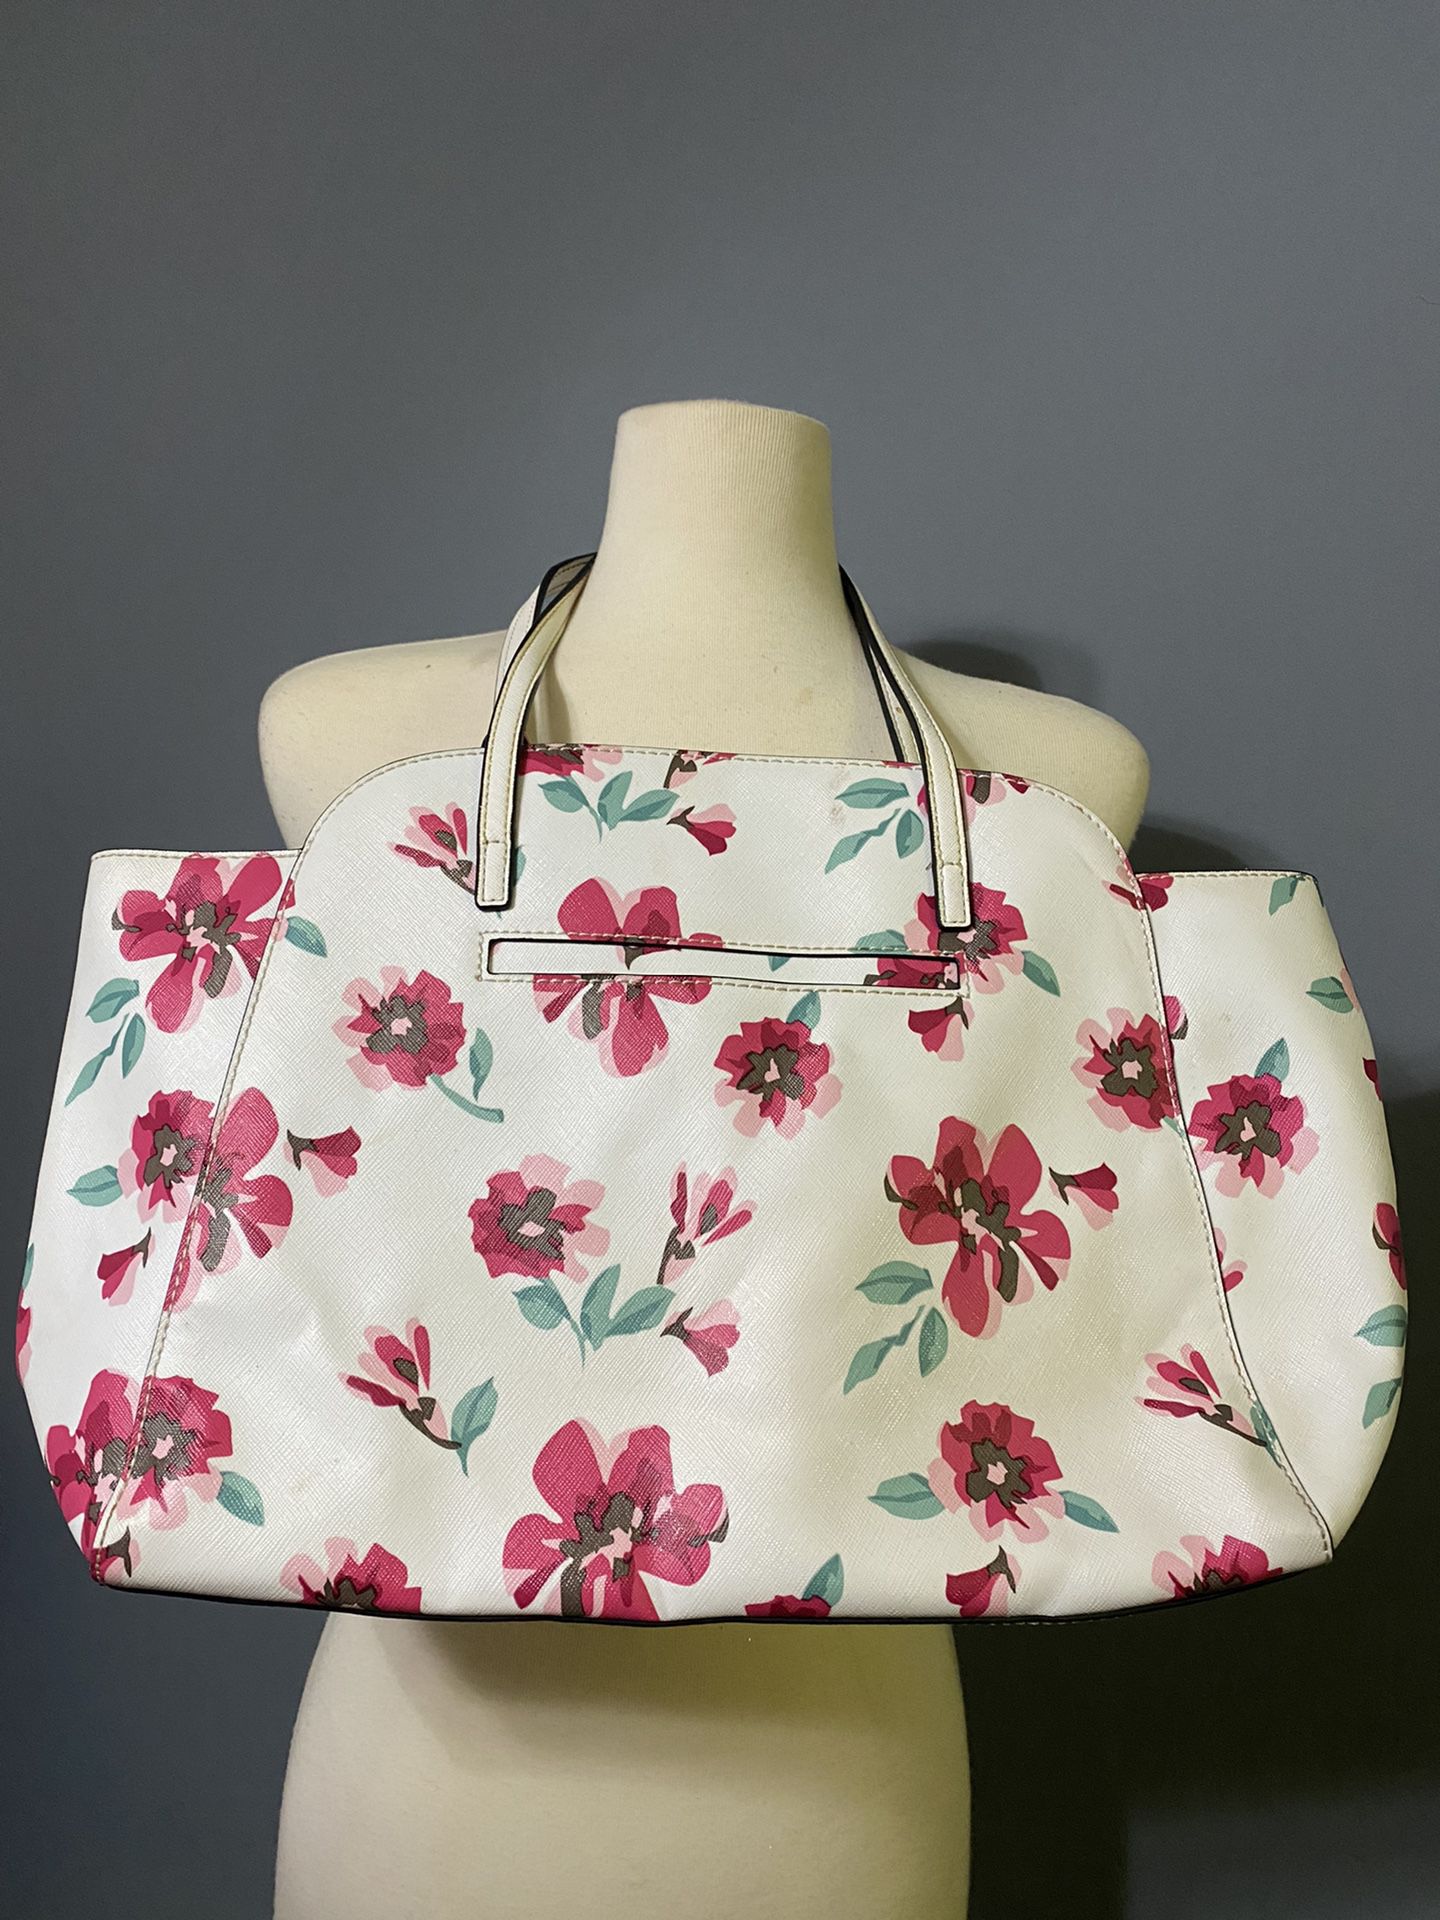 White and Floral Print Leather Guess Bag